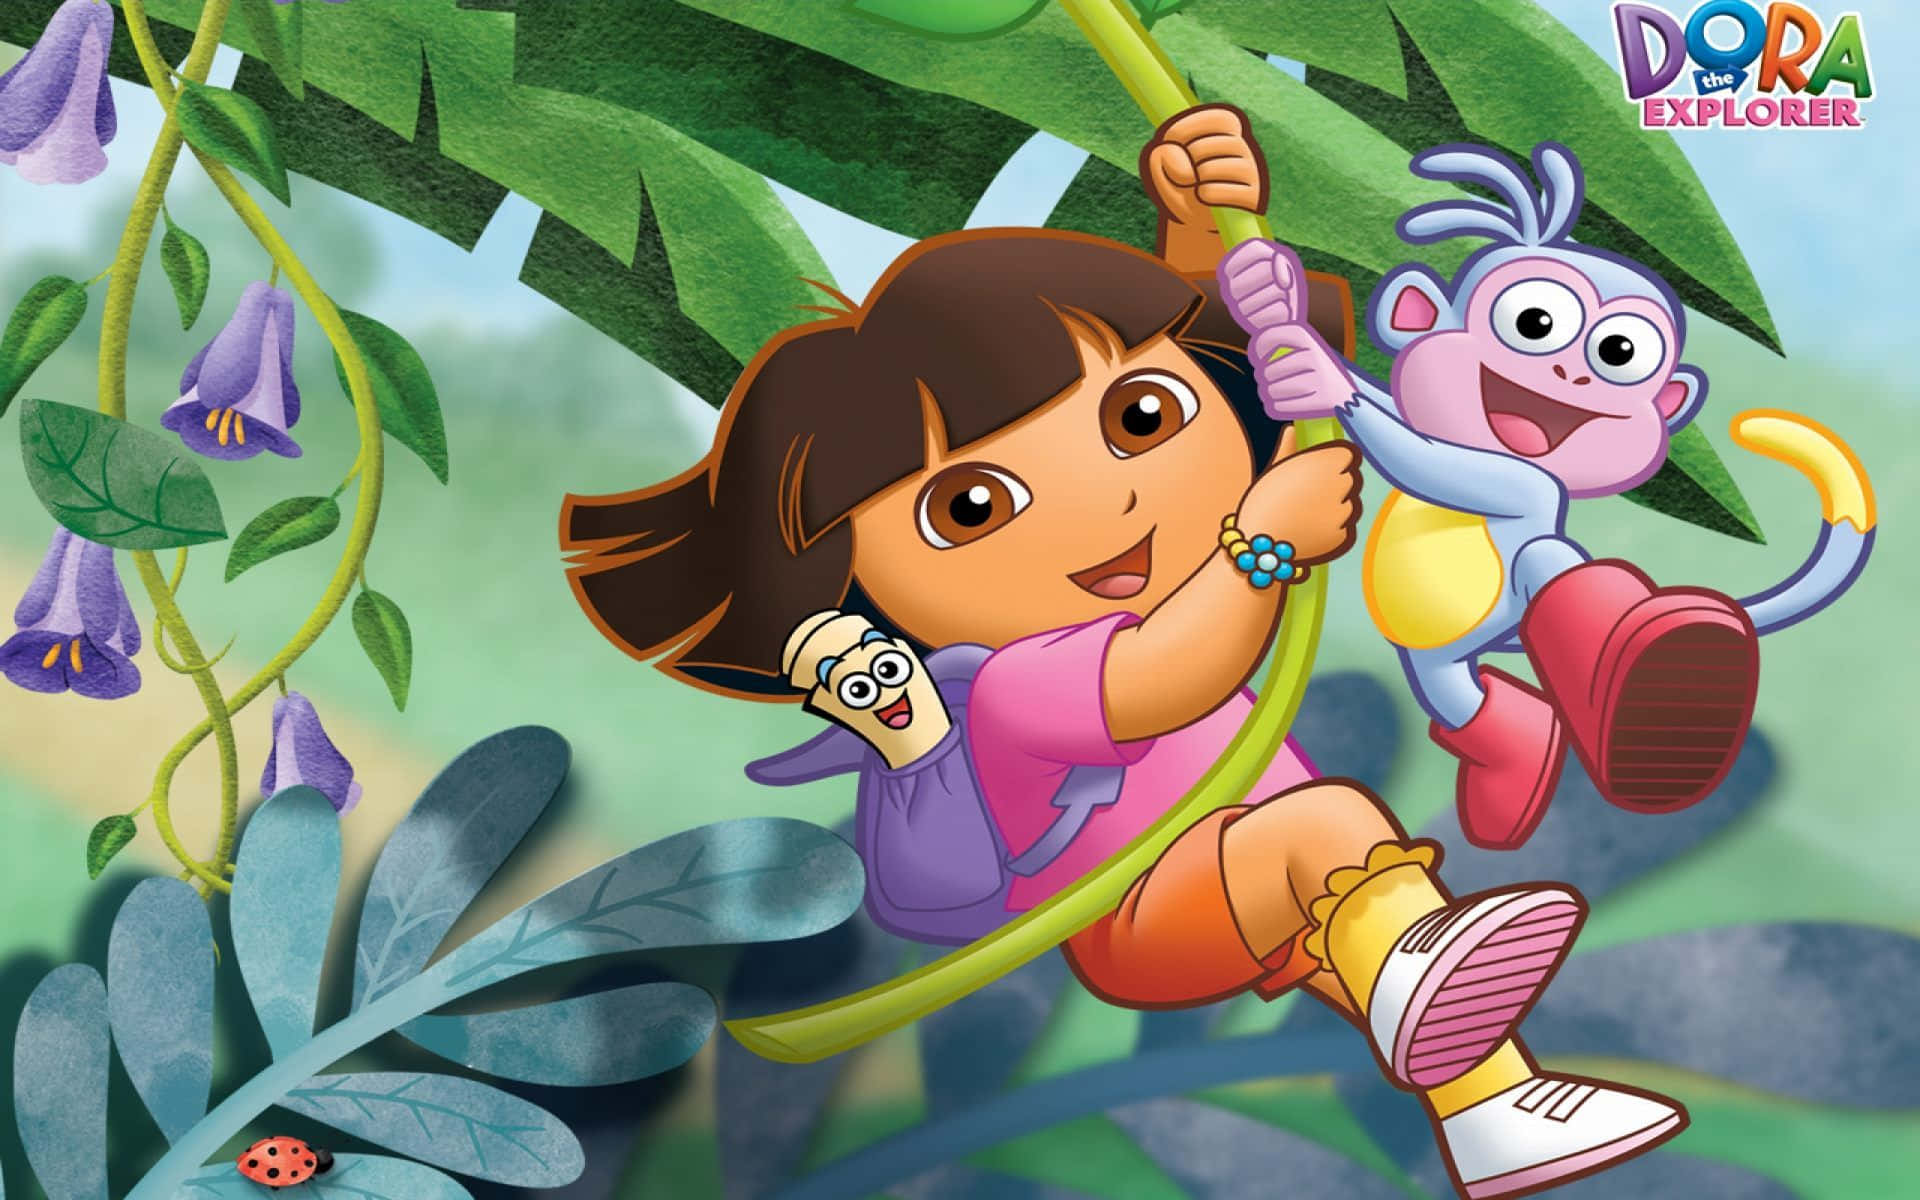 Dora the Explorer is Ready for Adventure!